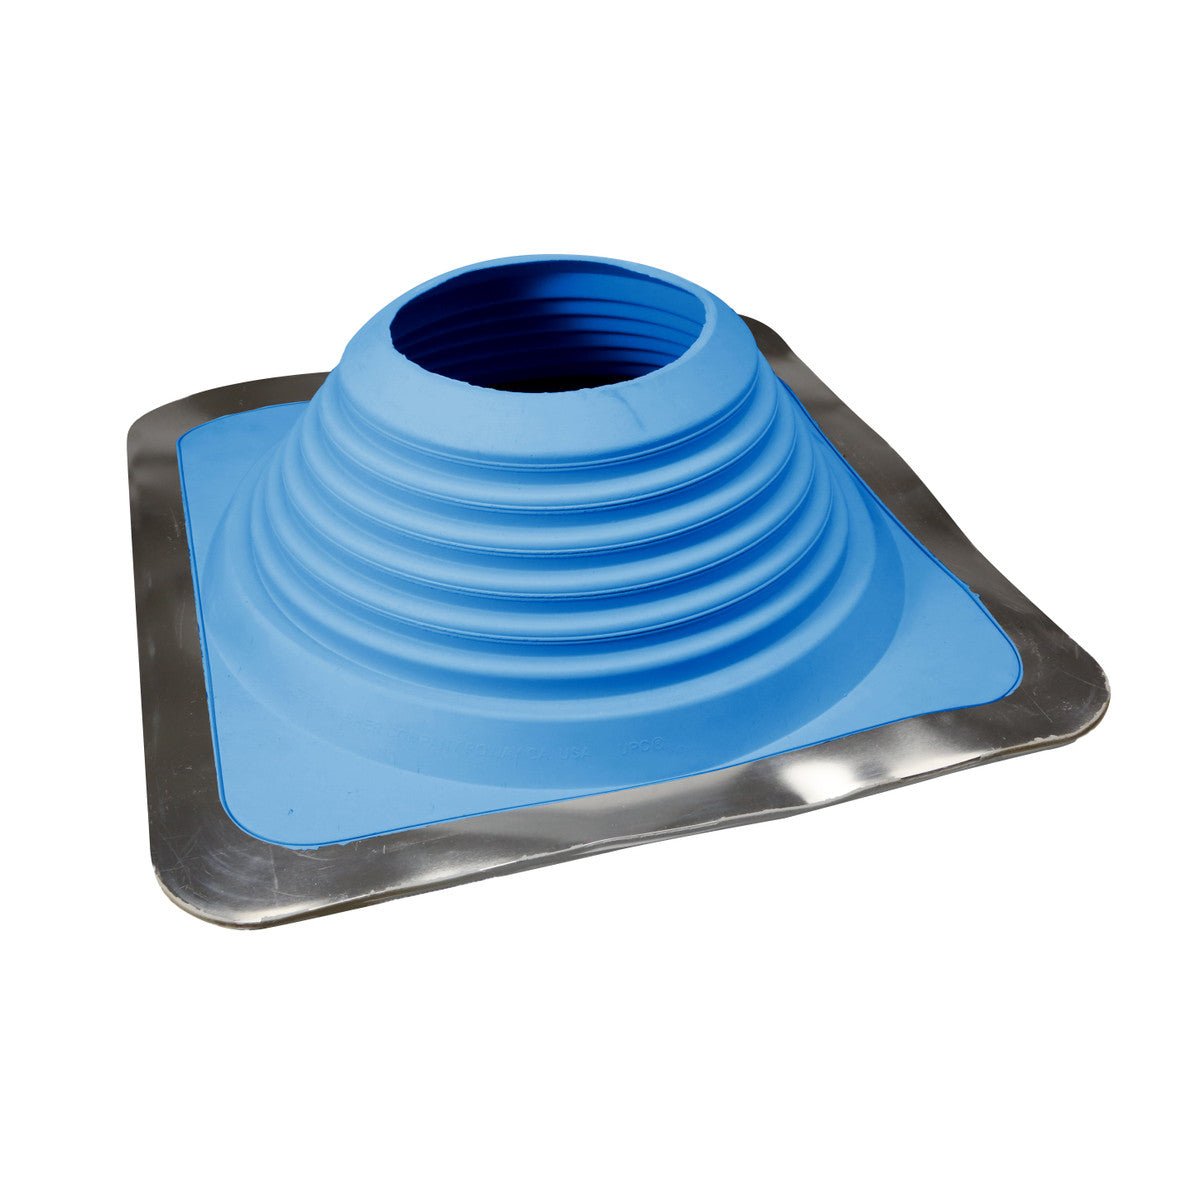 #9 Roofjack Square EPDM Pipe Flashing Boot, Light Blue